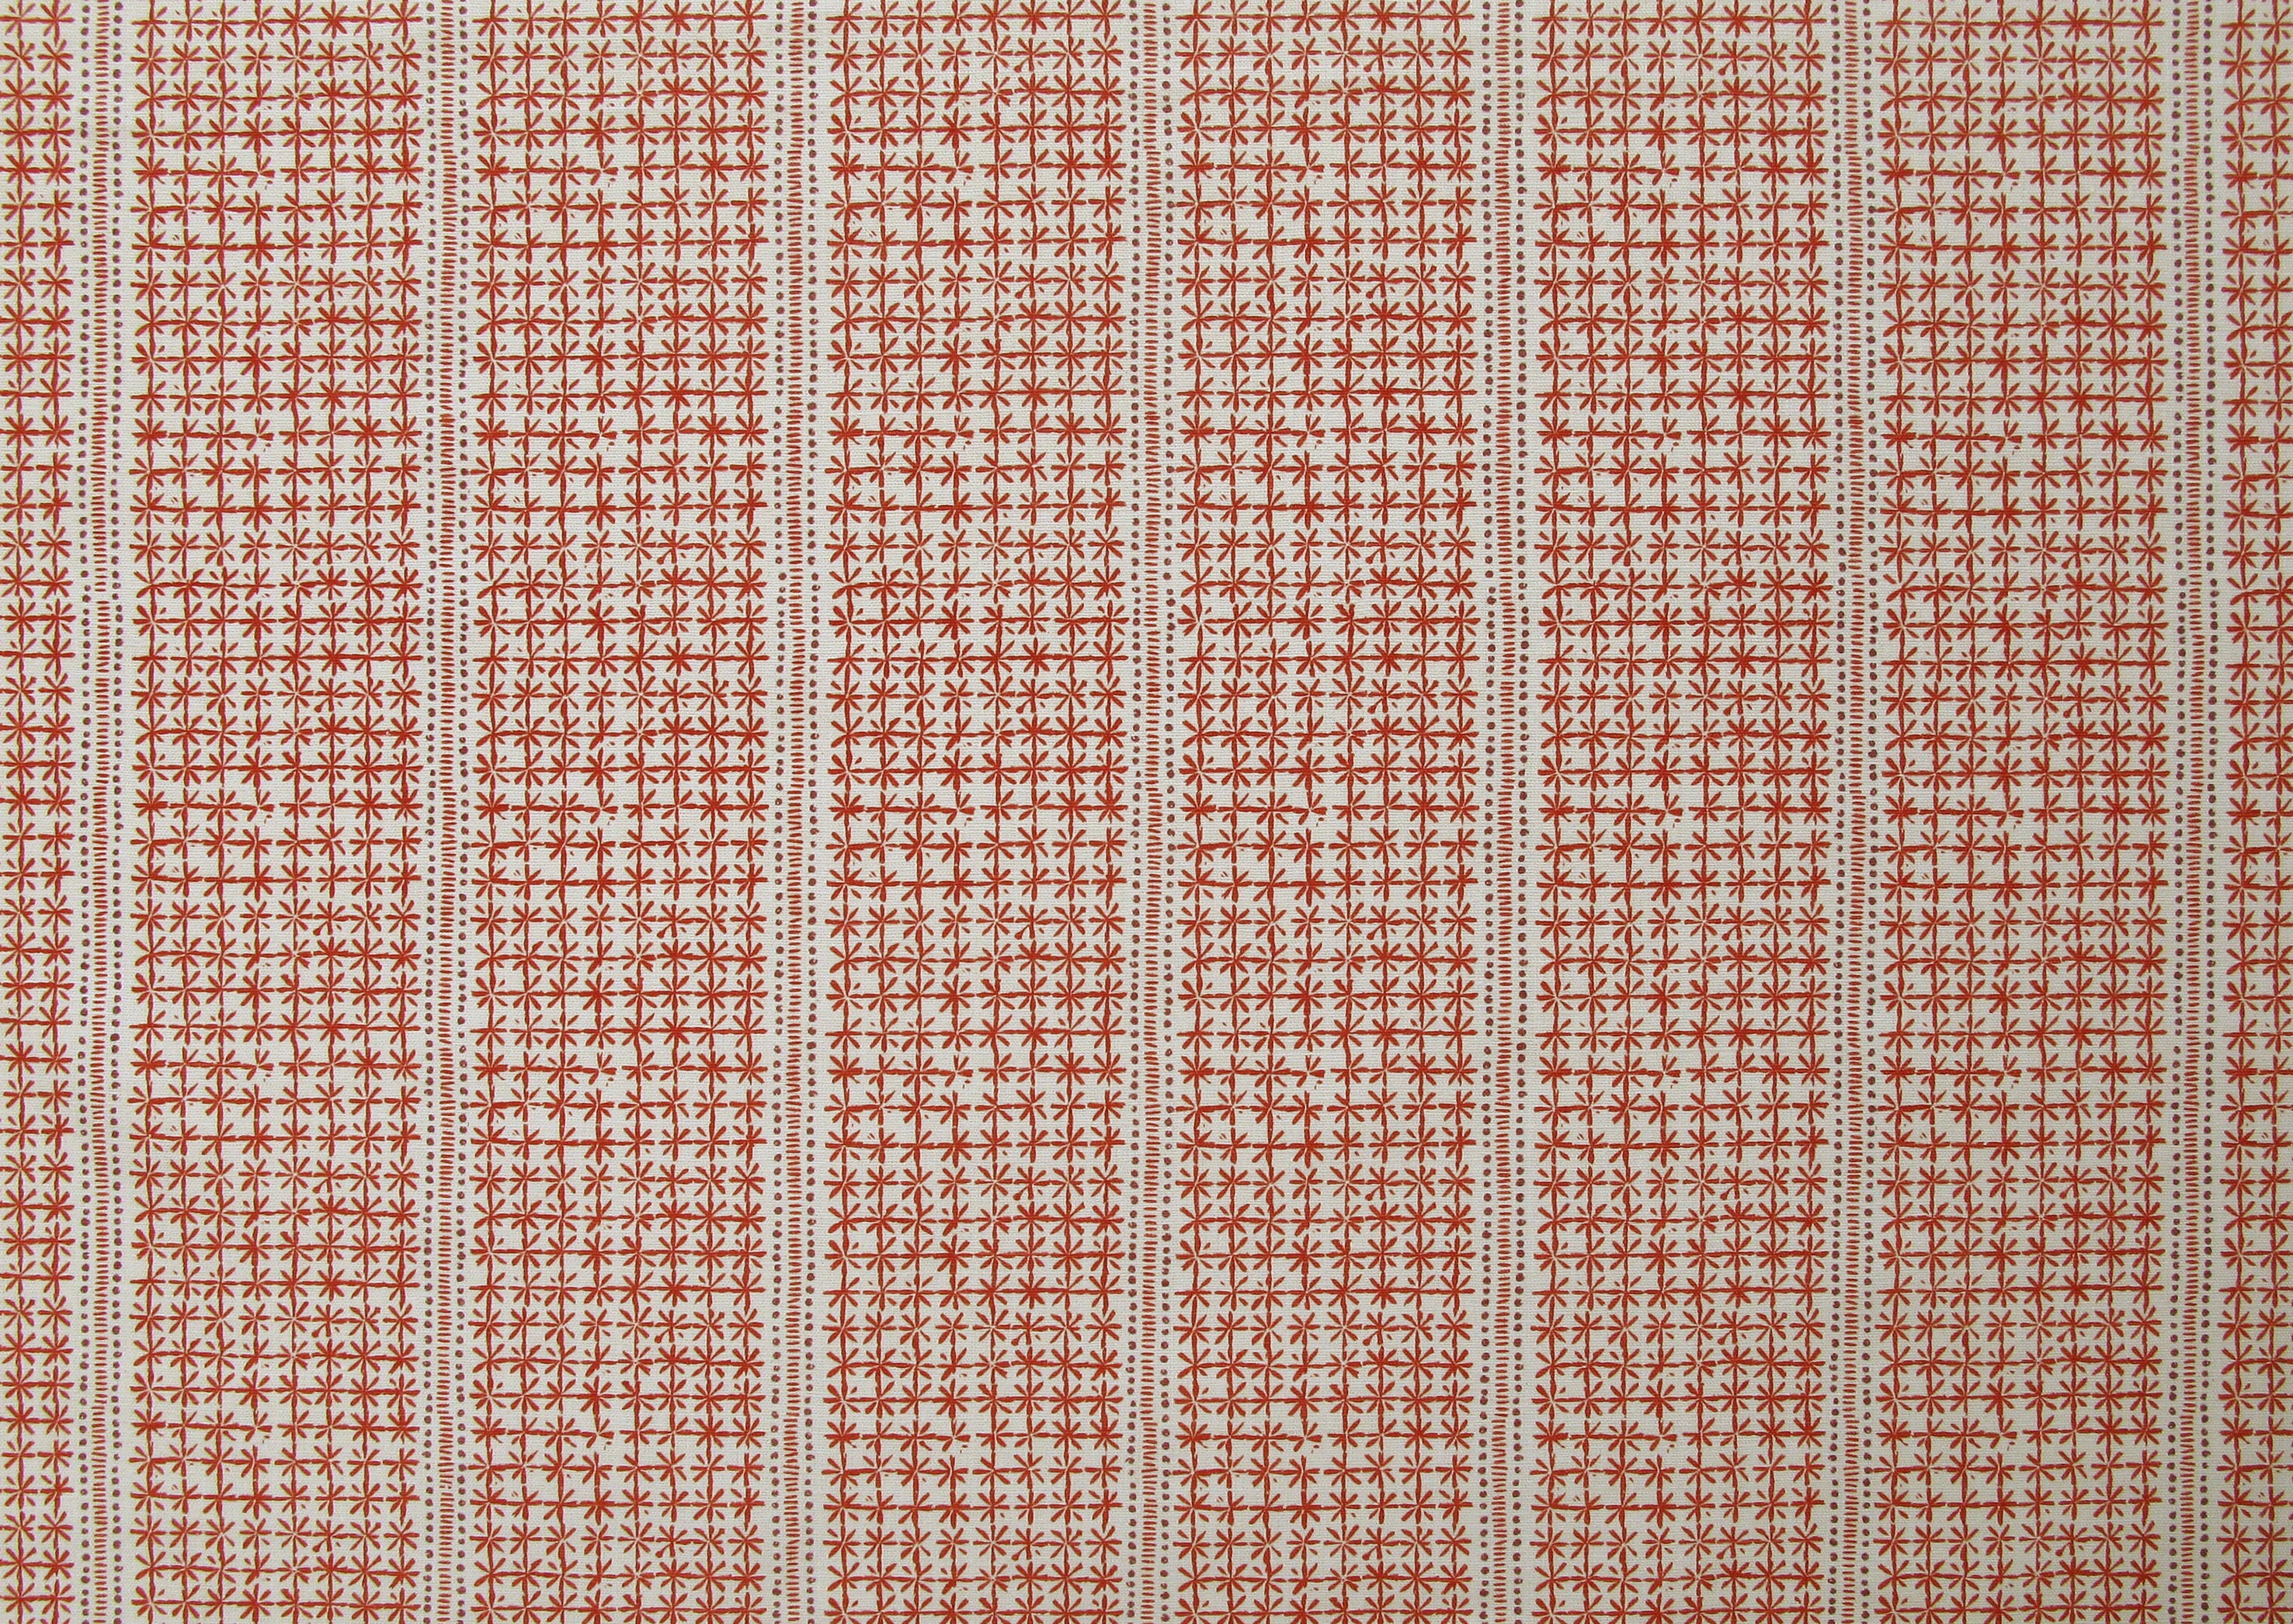 Detail of fabric in a dense repeating stripe and star print in red on a cream field.